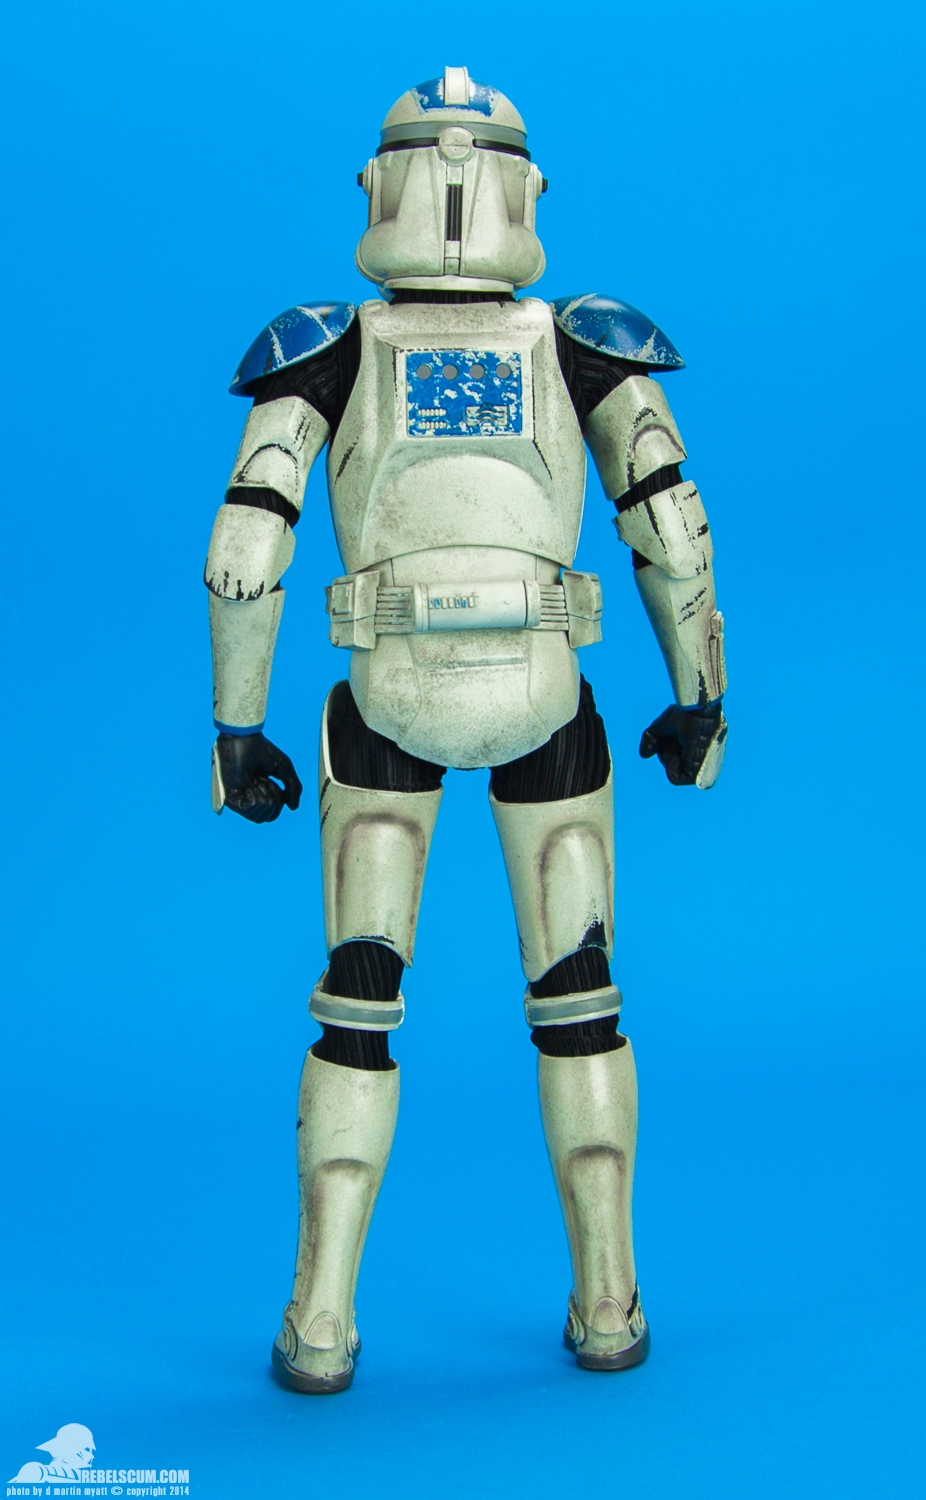 Clone-Trooper-Deluxe-501st-Sixth-Scale-Figure-Sideshow-008.jpg